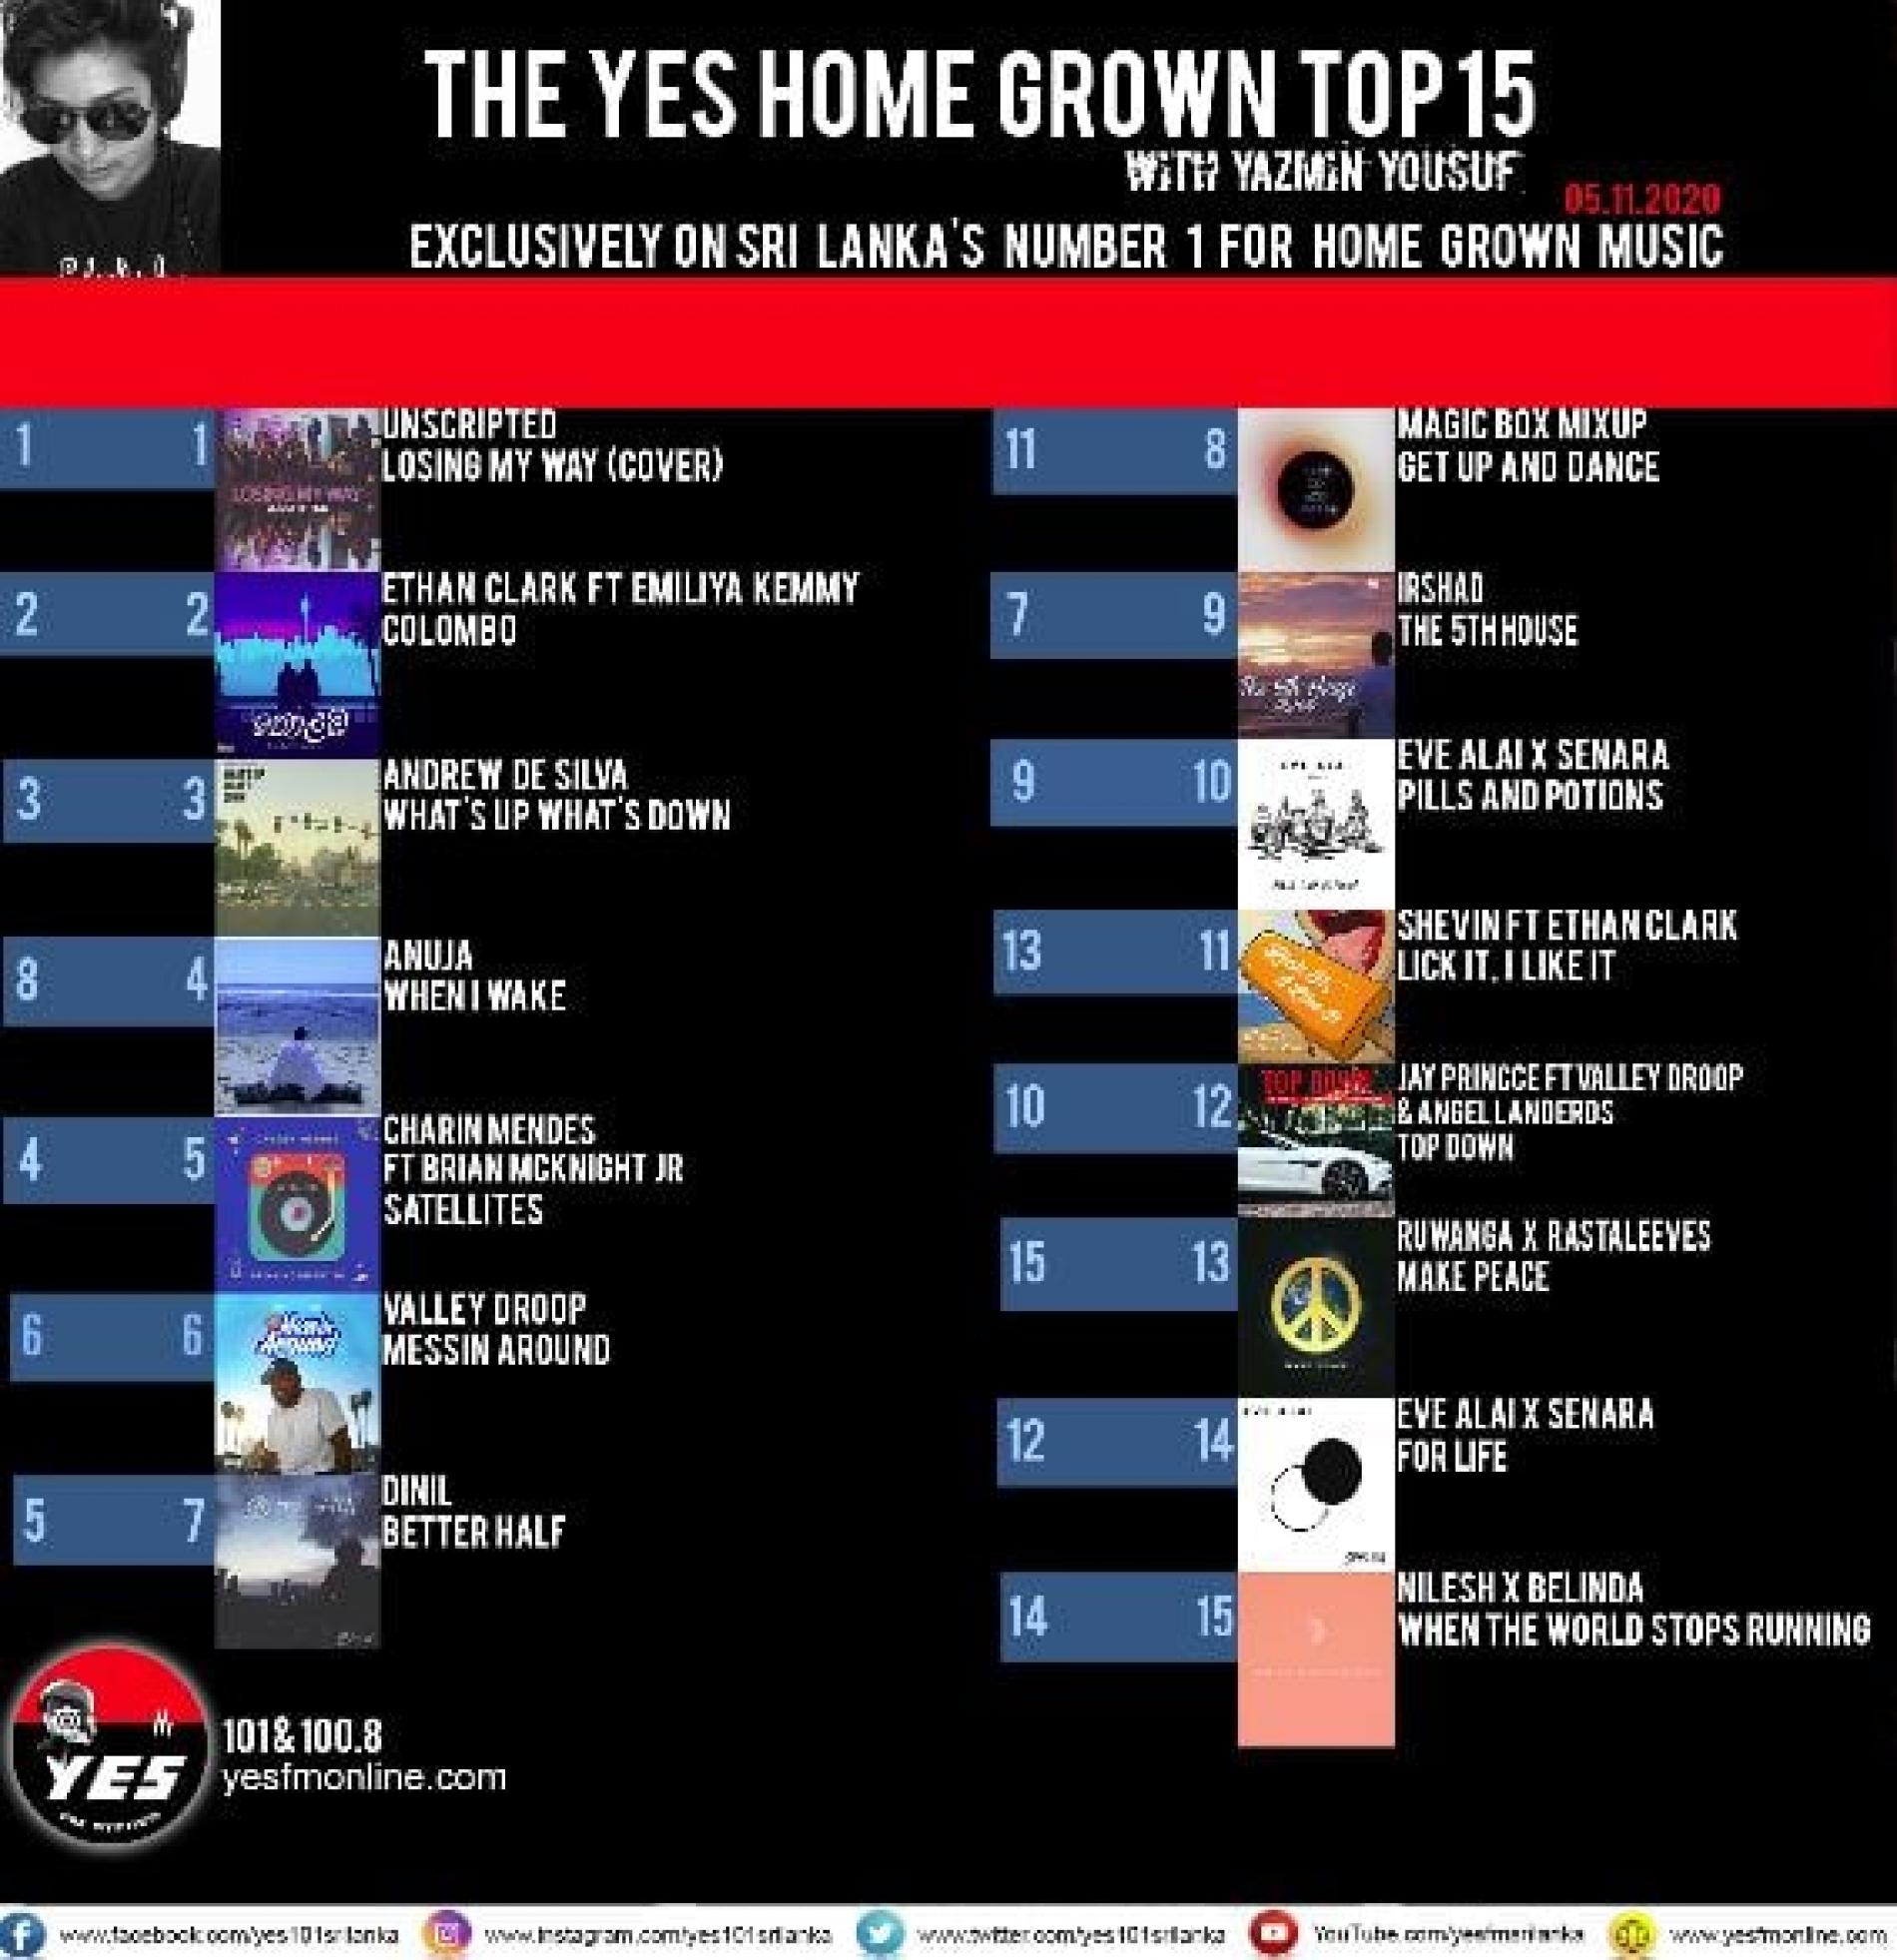 News : Unscripted Completes Week 6 On The YES Home Grown Top 15!